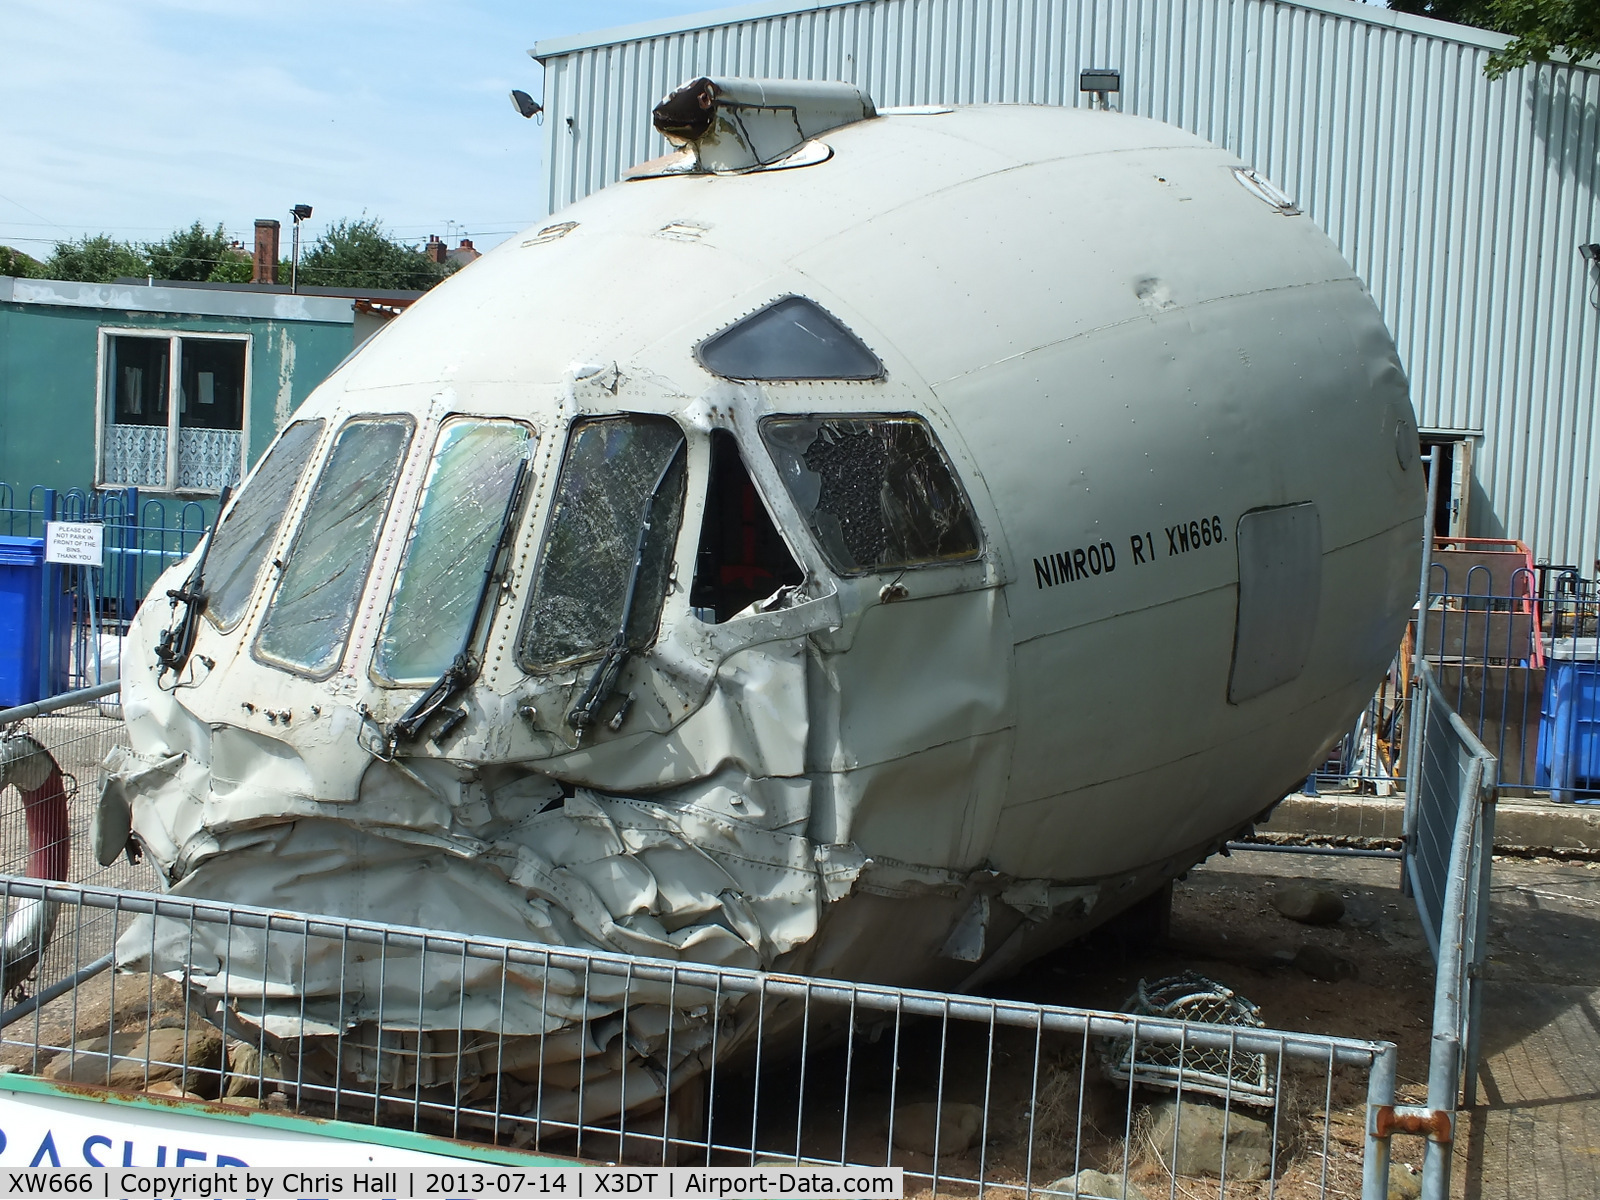 XW666, Hawker Siddeley Nimrod R.1 C/N 8041, preserved at the South Yorkshire Aircraft Museum, AeroVenture, Doncaster